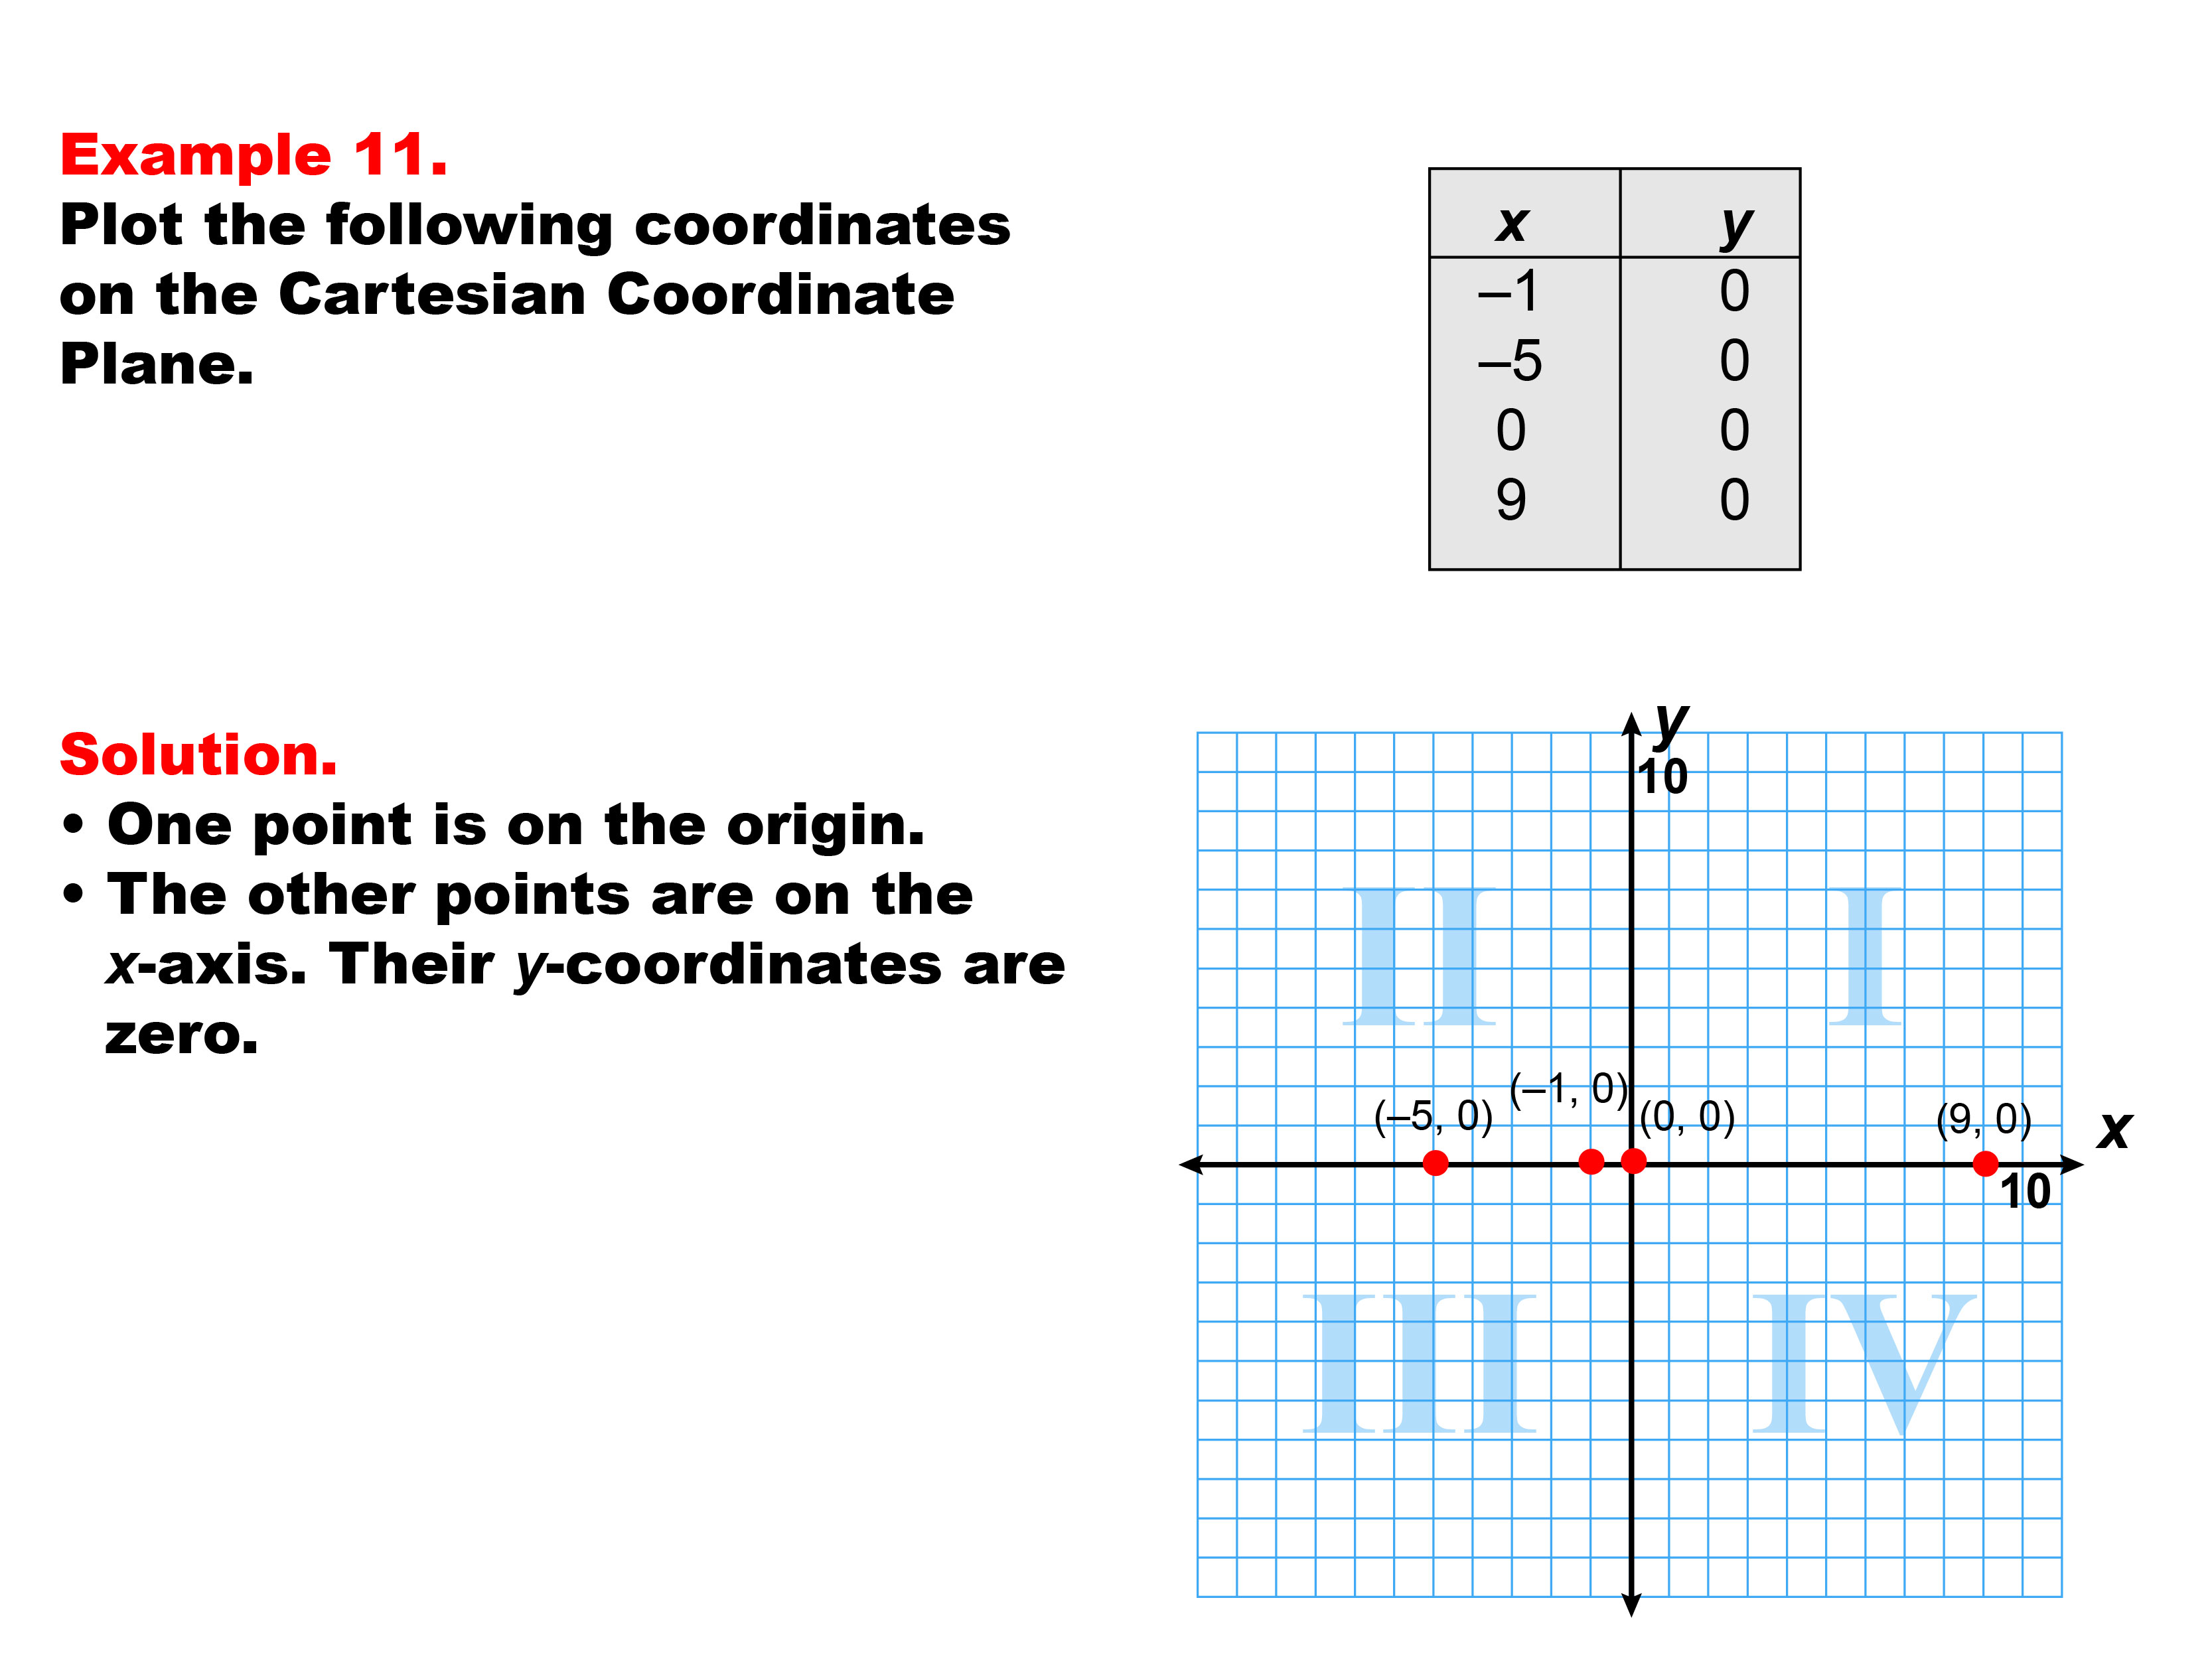 Coordinate Systems: Example 11. Graphing coordinates on the x-axis of a Cartesian Coordinate System.